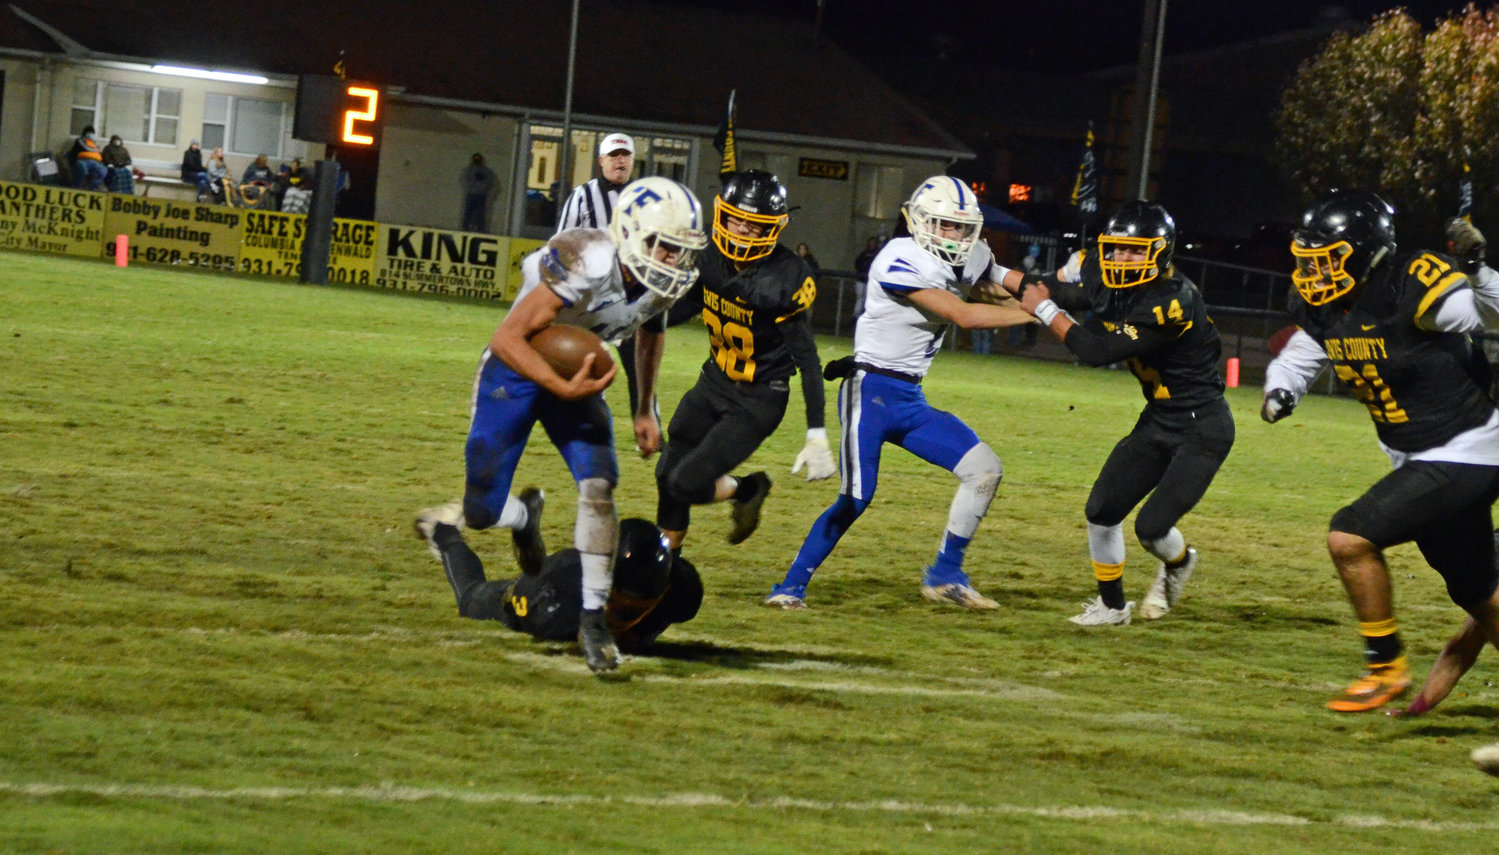 Brenton Burchell sheds a Lewis County tackler before breaking to the outside for a big 21-yard first quarter run.